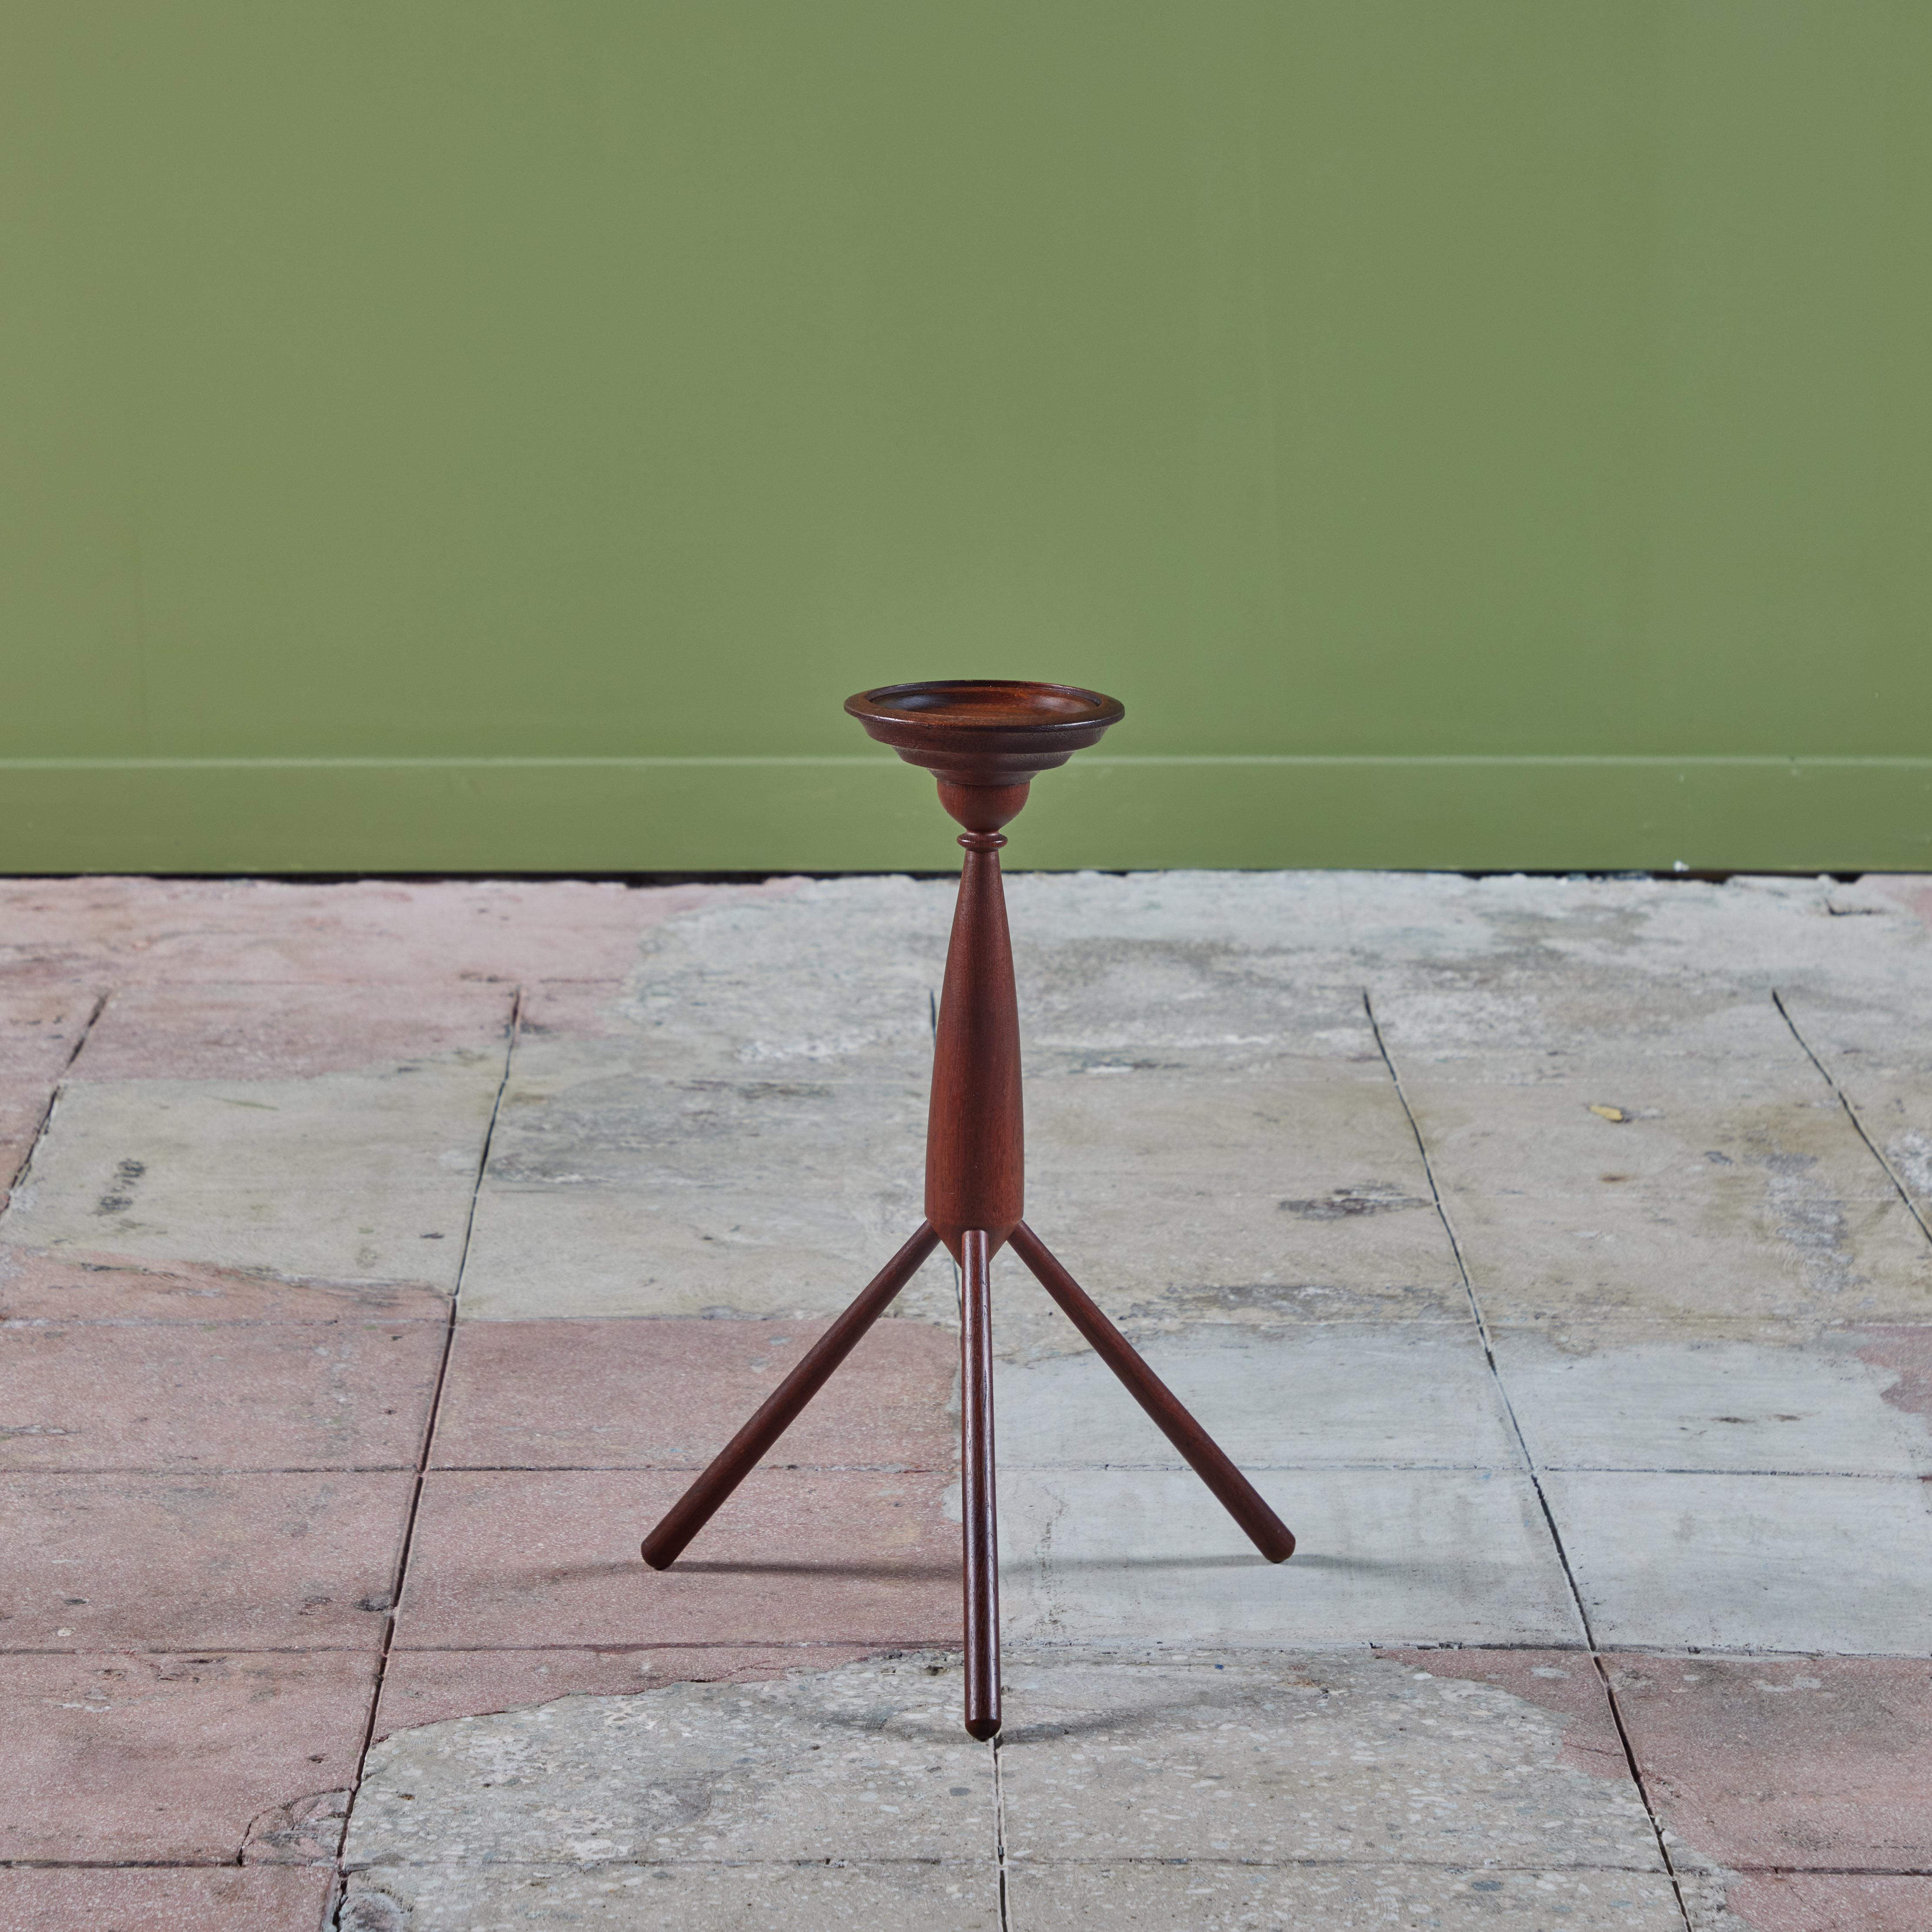 Teak tripod side table is supported by a teak shaft and three flared legs. The perfect petite table for an office, library or living area.

Dimensions 
13